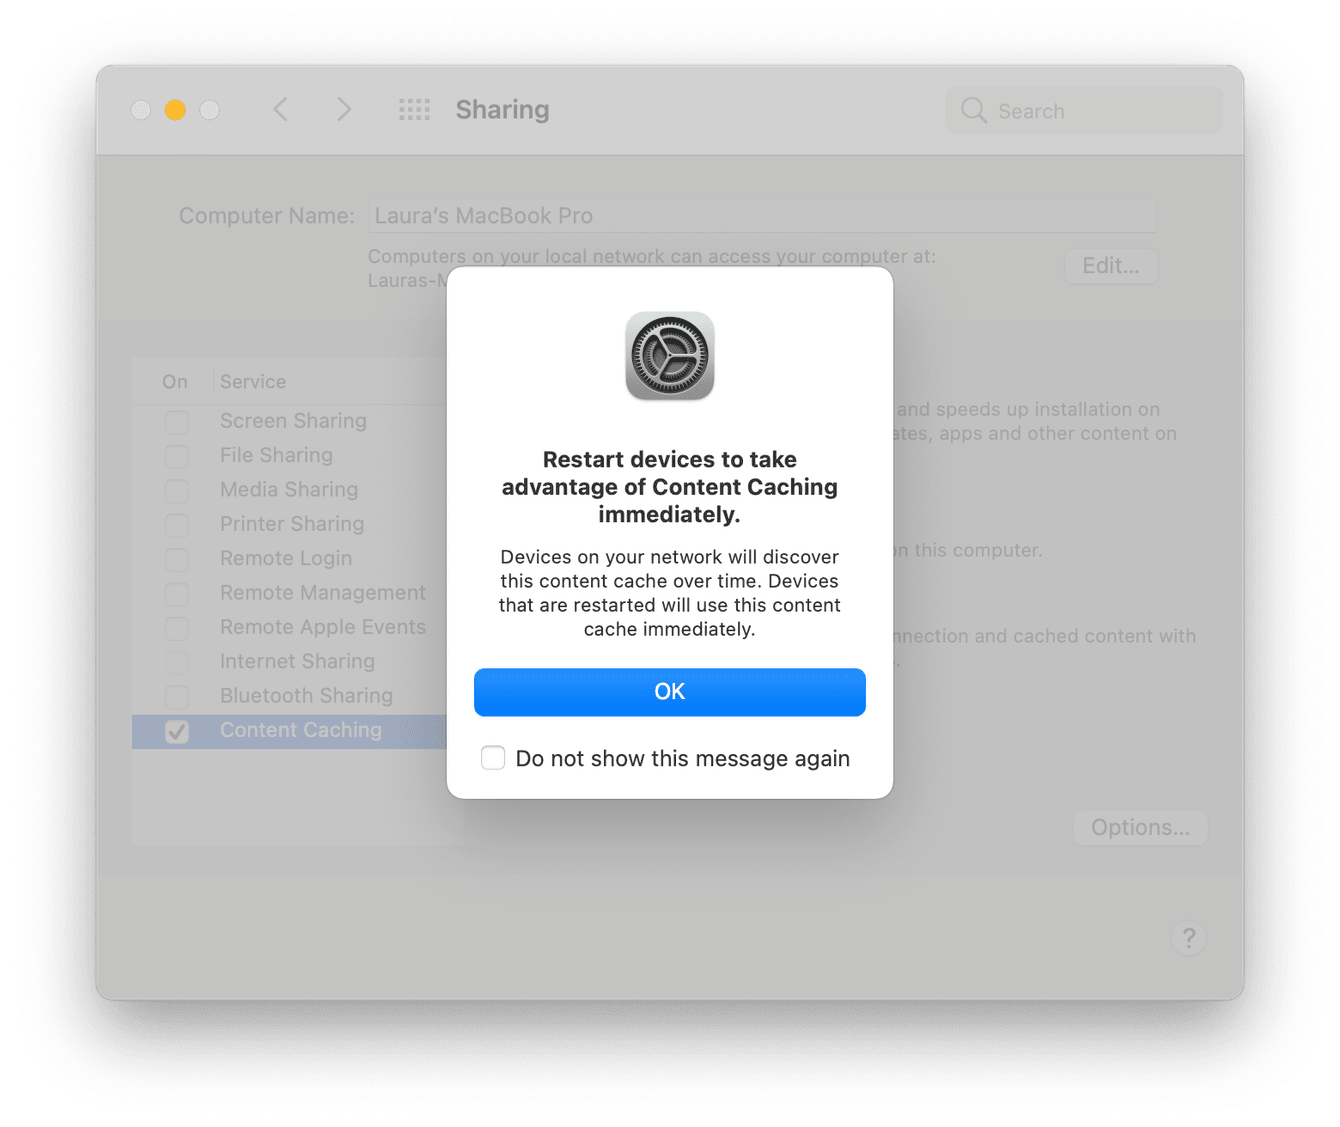 downloading messages for mac